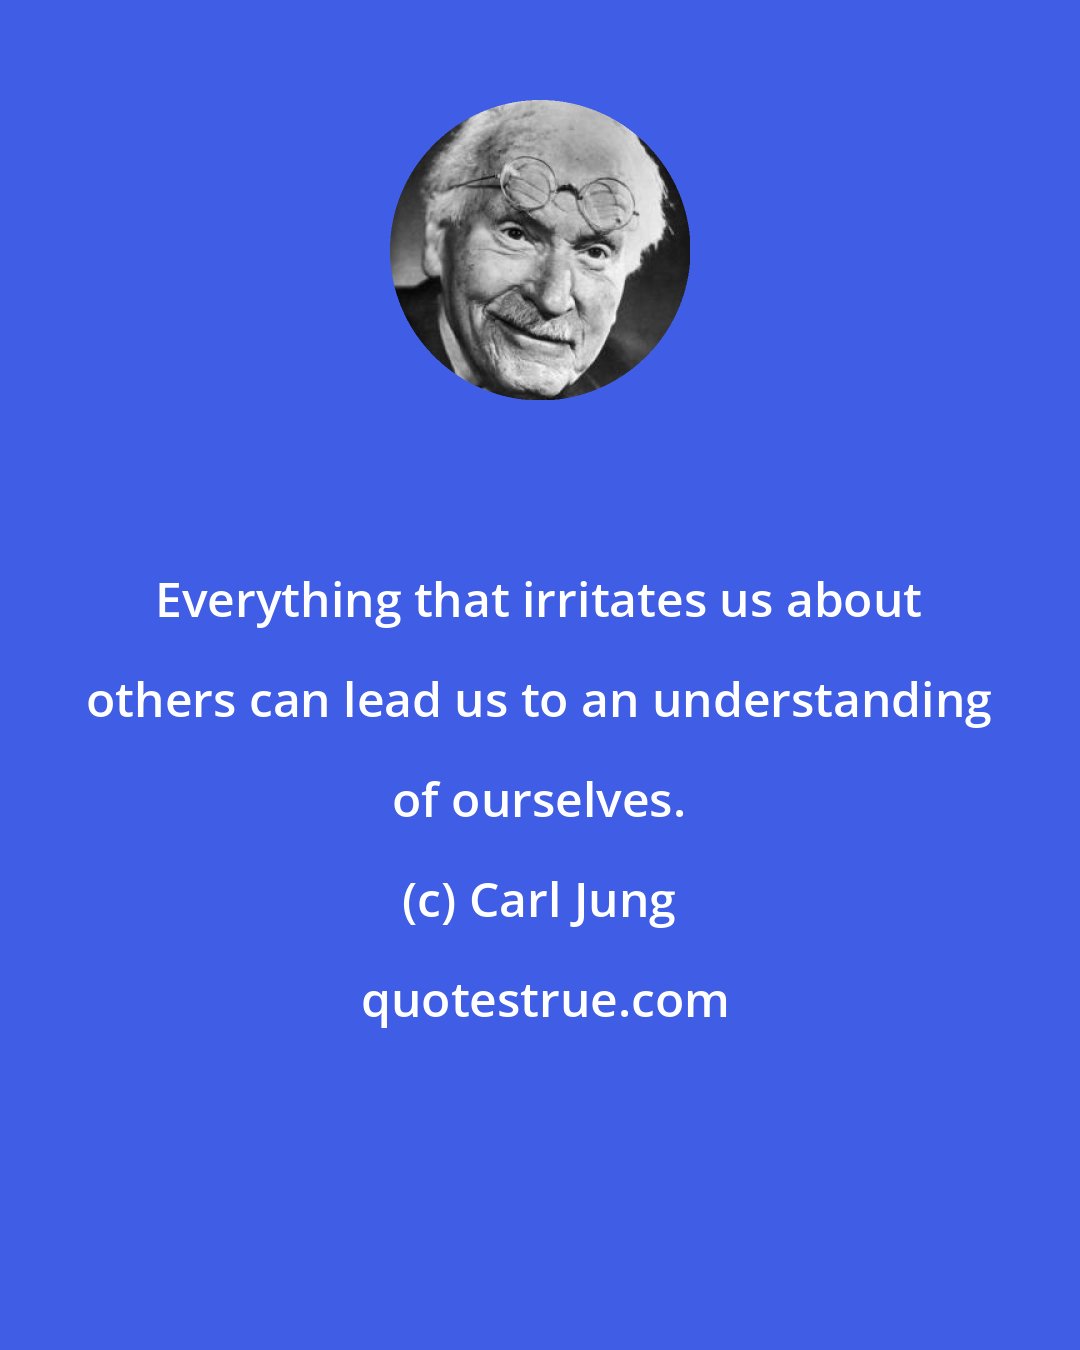 Carl Jung: Everything that irritates us about others can lead us to an understanding of ourselves.